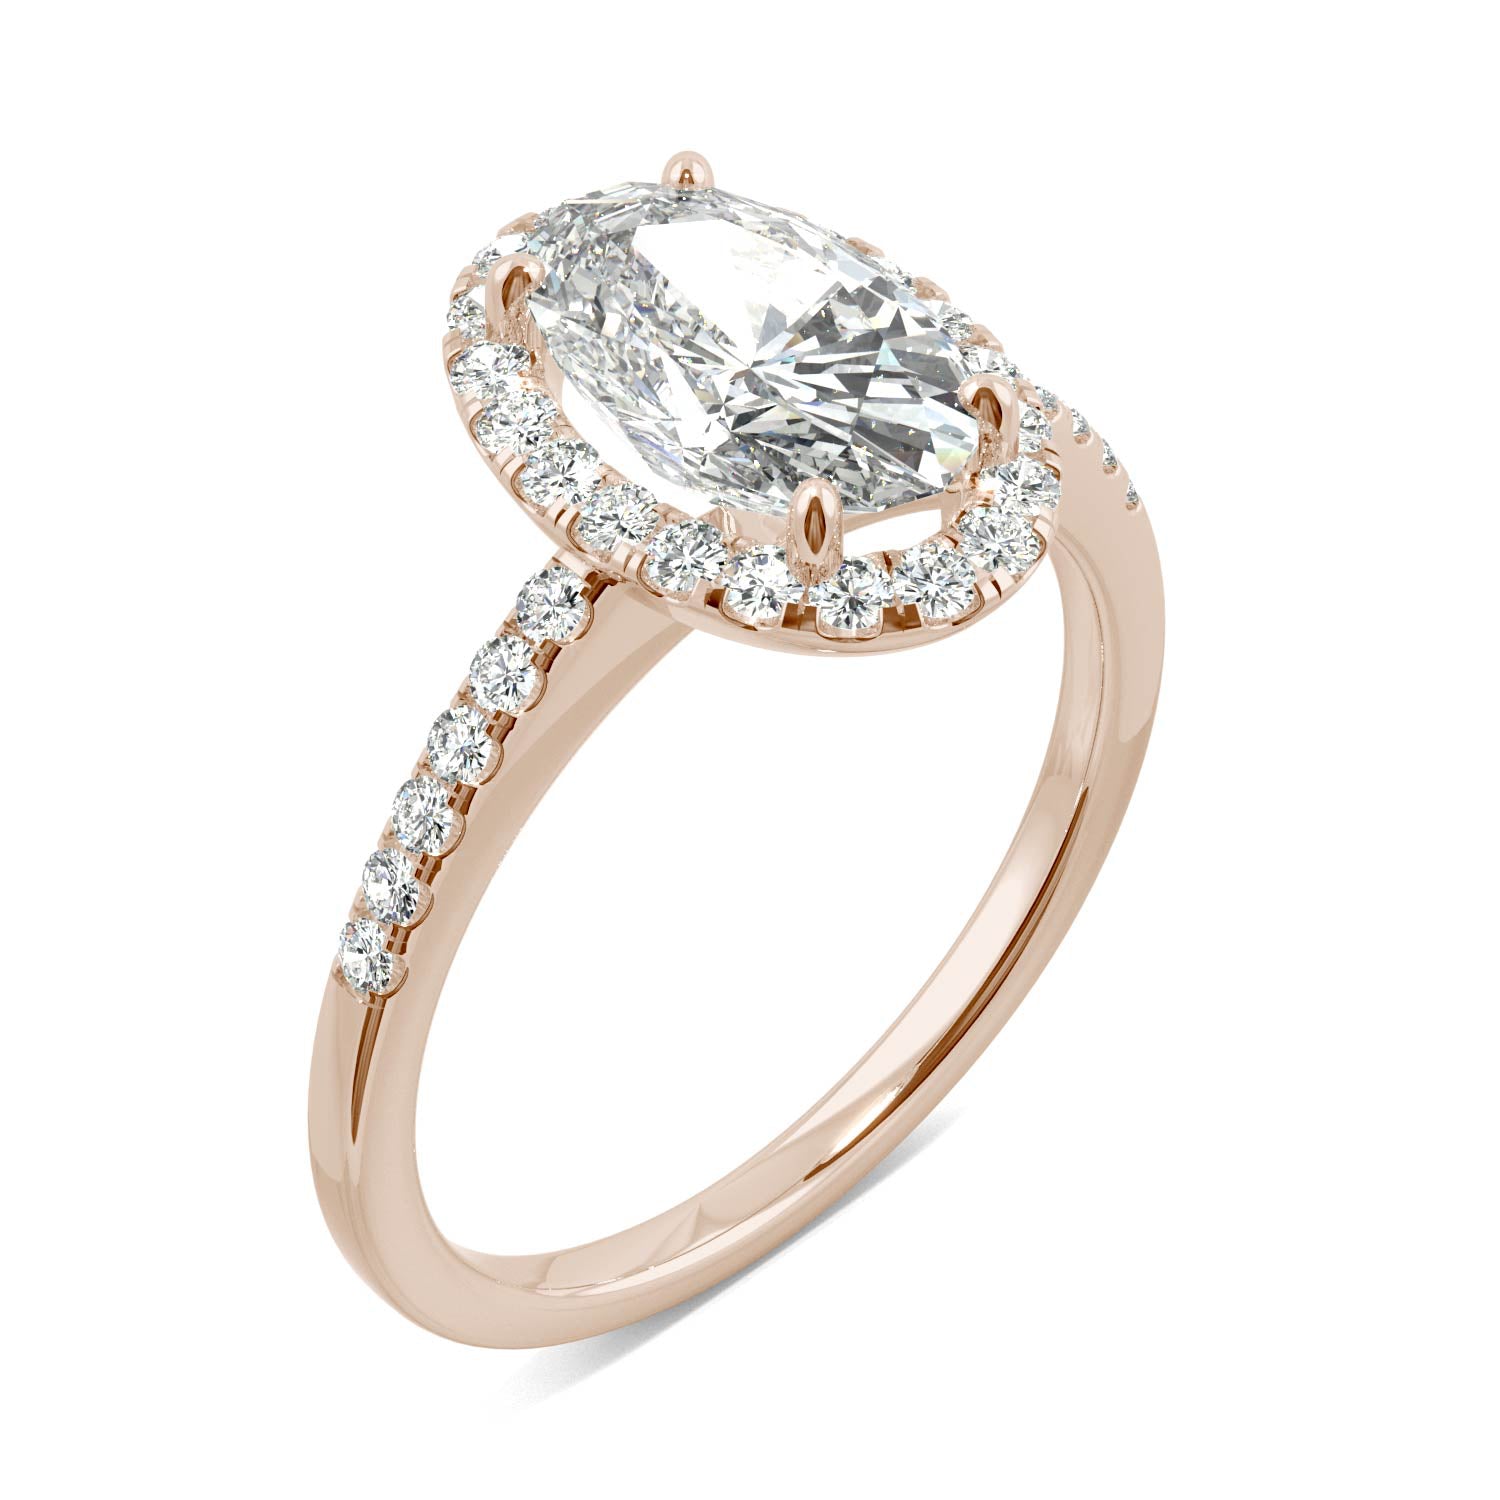 2.62 CTW DEW Elongated Oval Moissanite Halo Ring in 14K Rose Gold